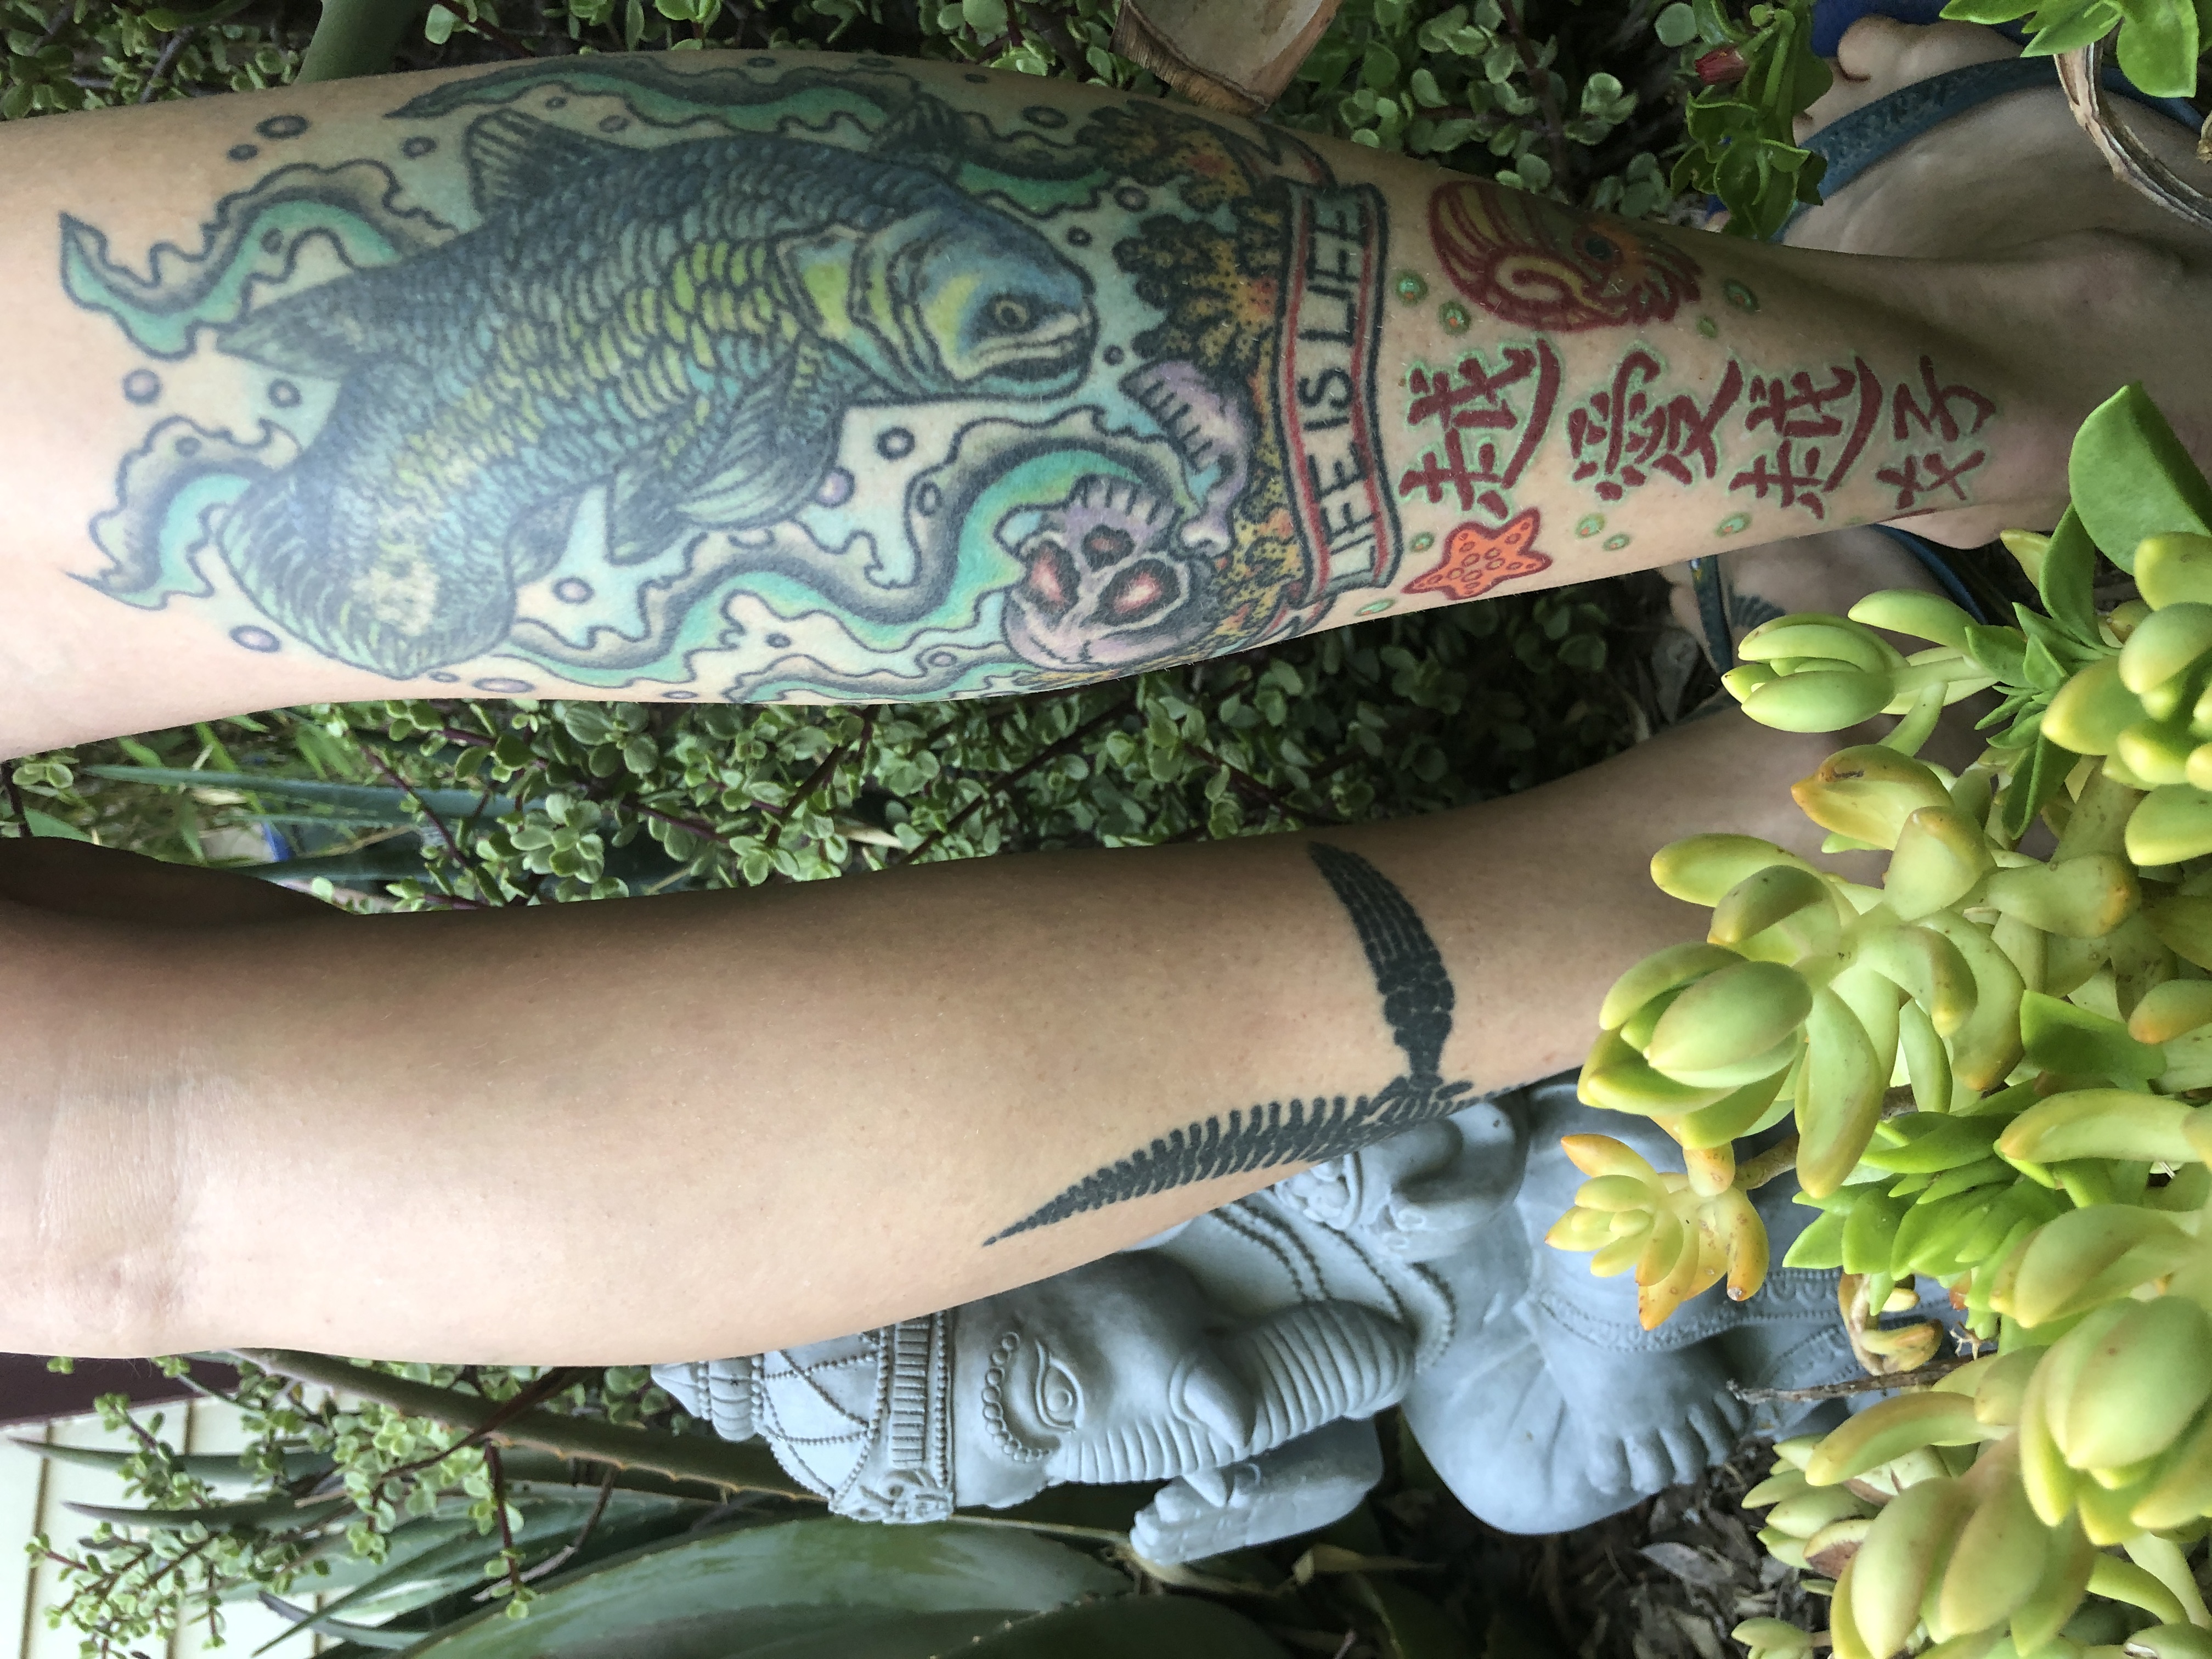 Some of Jingmai O'Connor's tattoos, including the phrase "life is life."